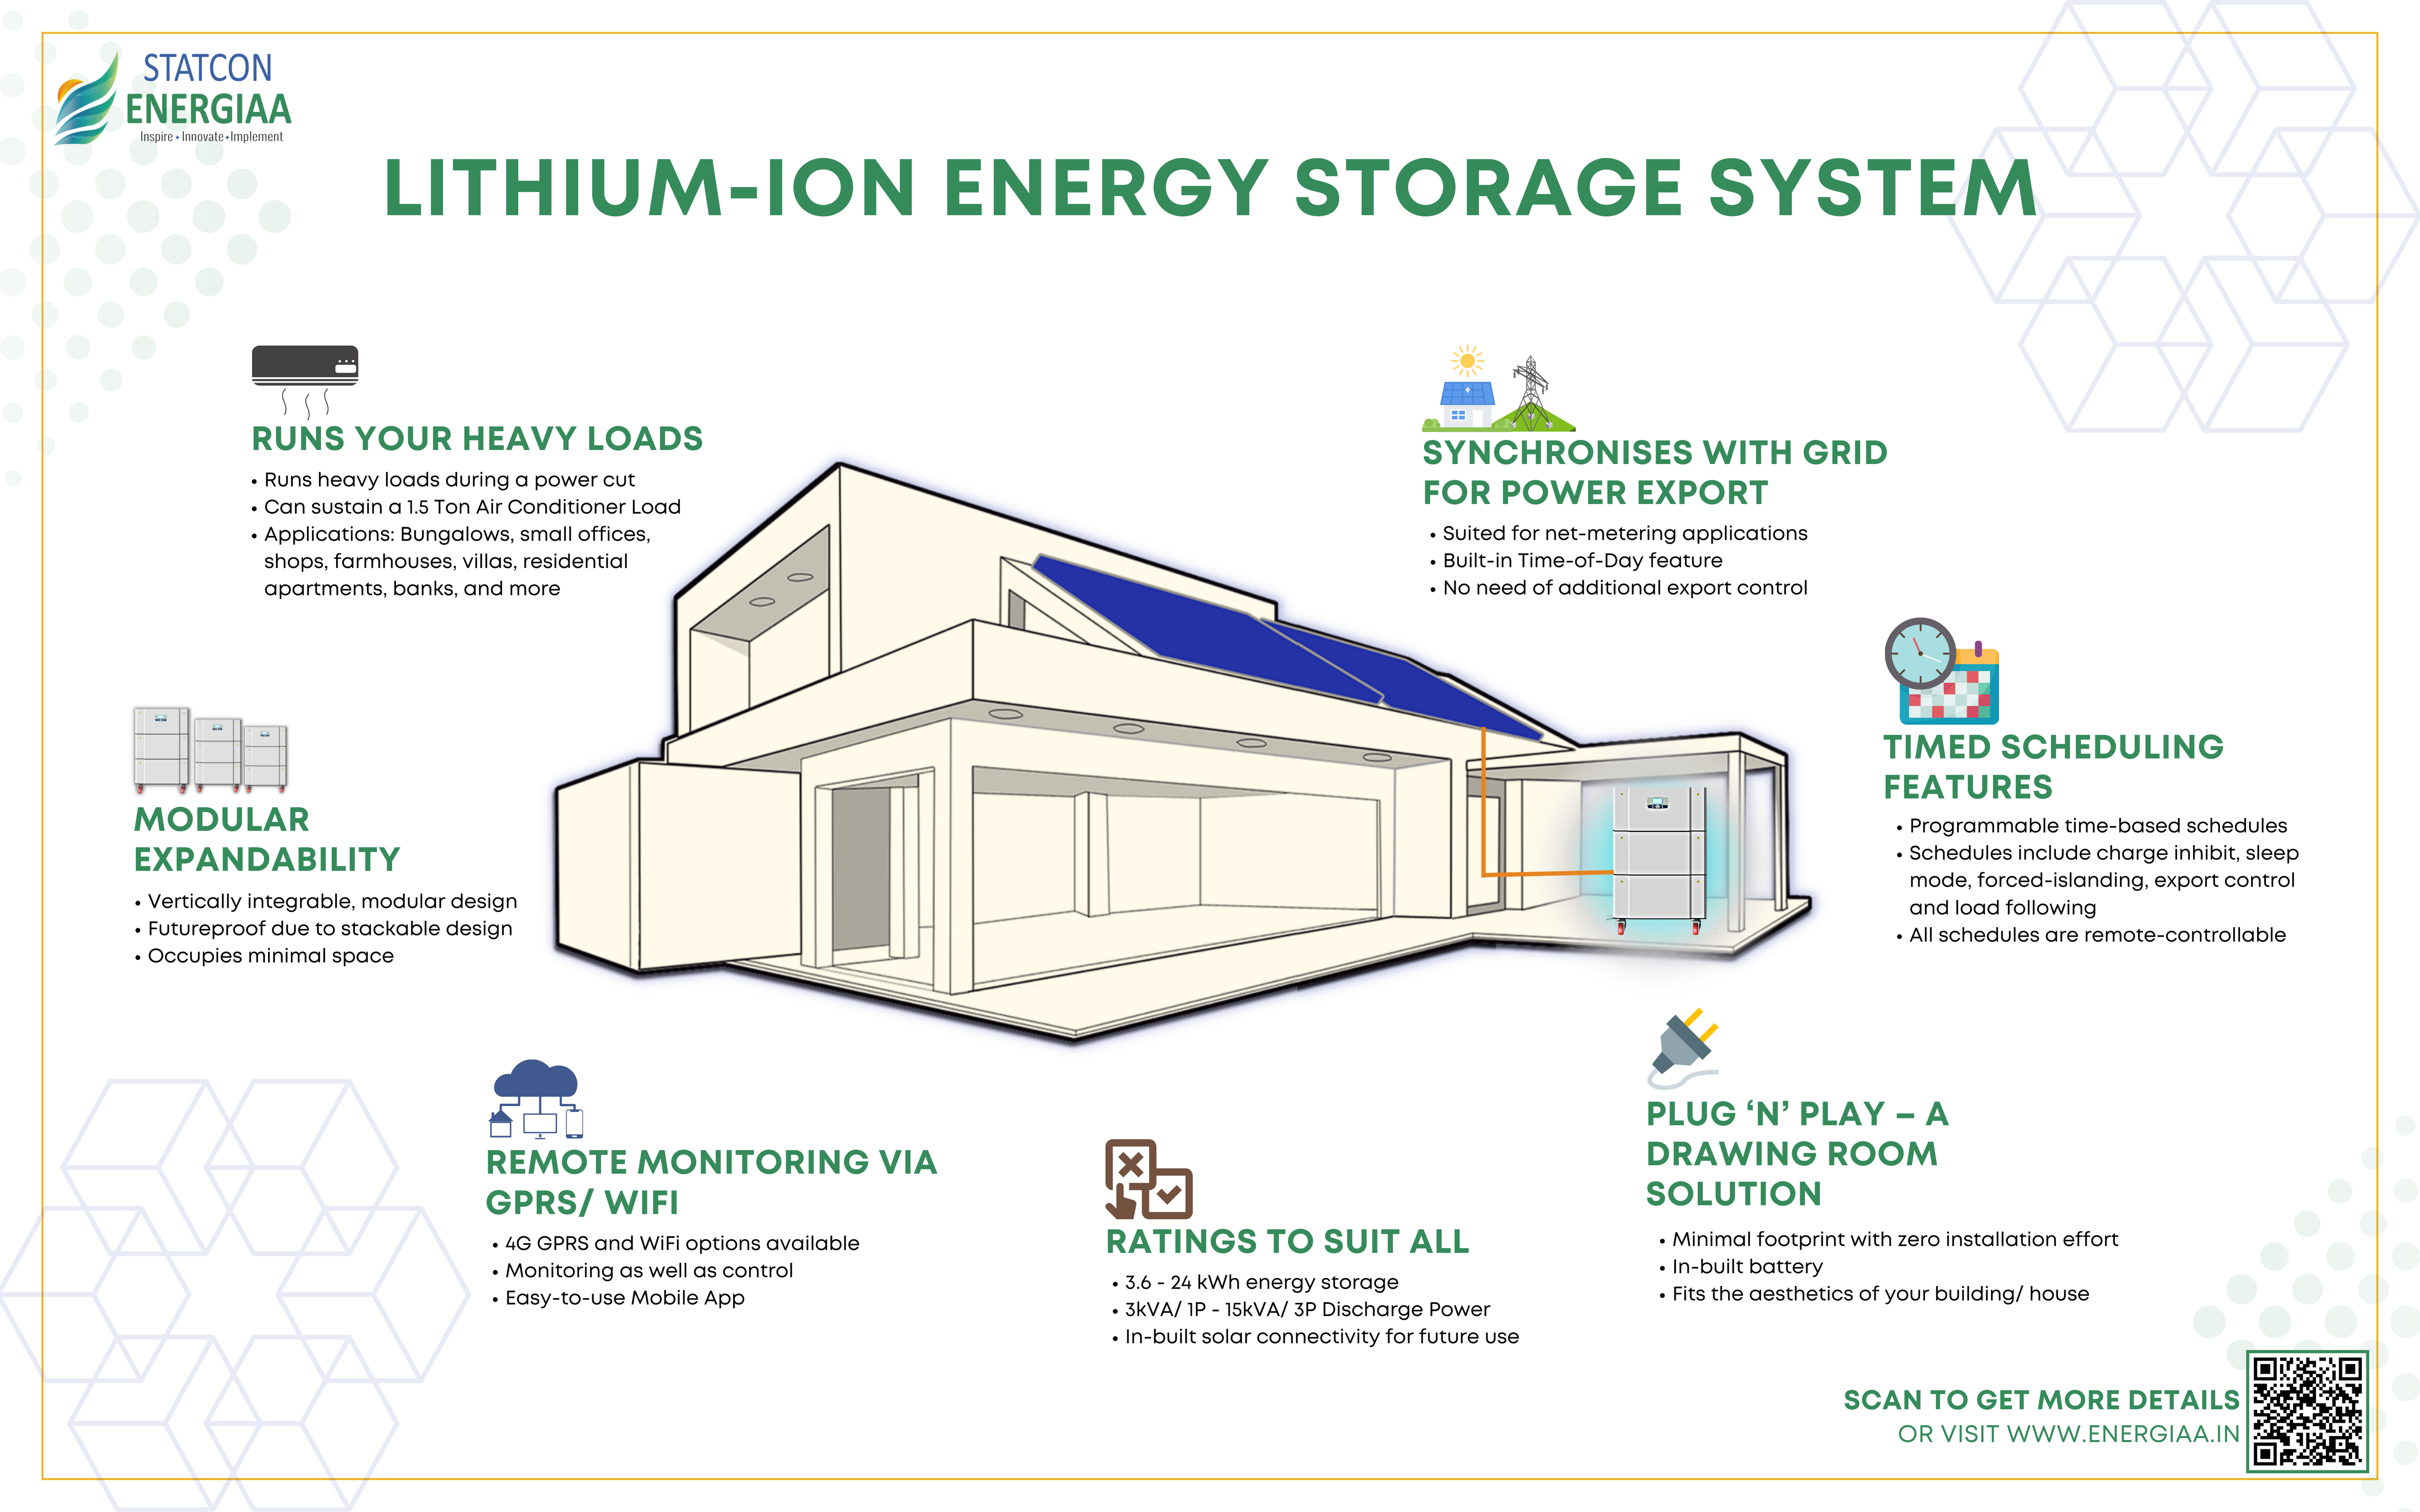 Statcon Energiaa's Energy Storage System features and technical specs